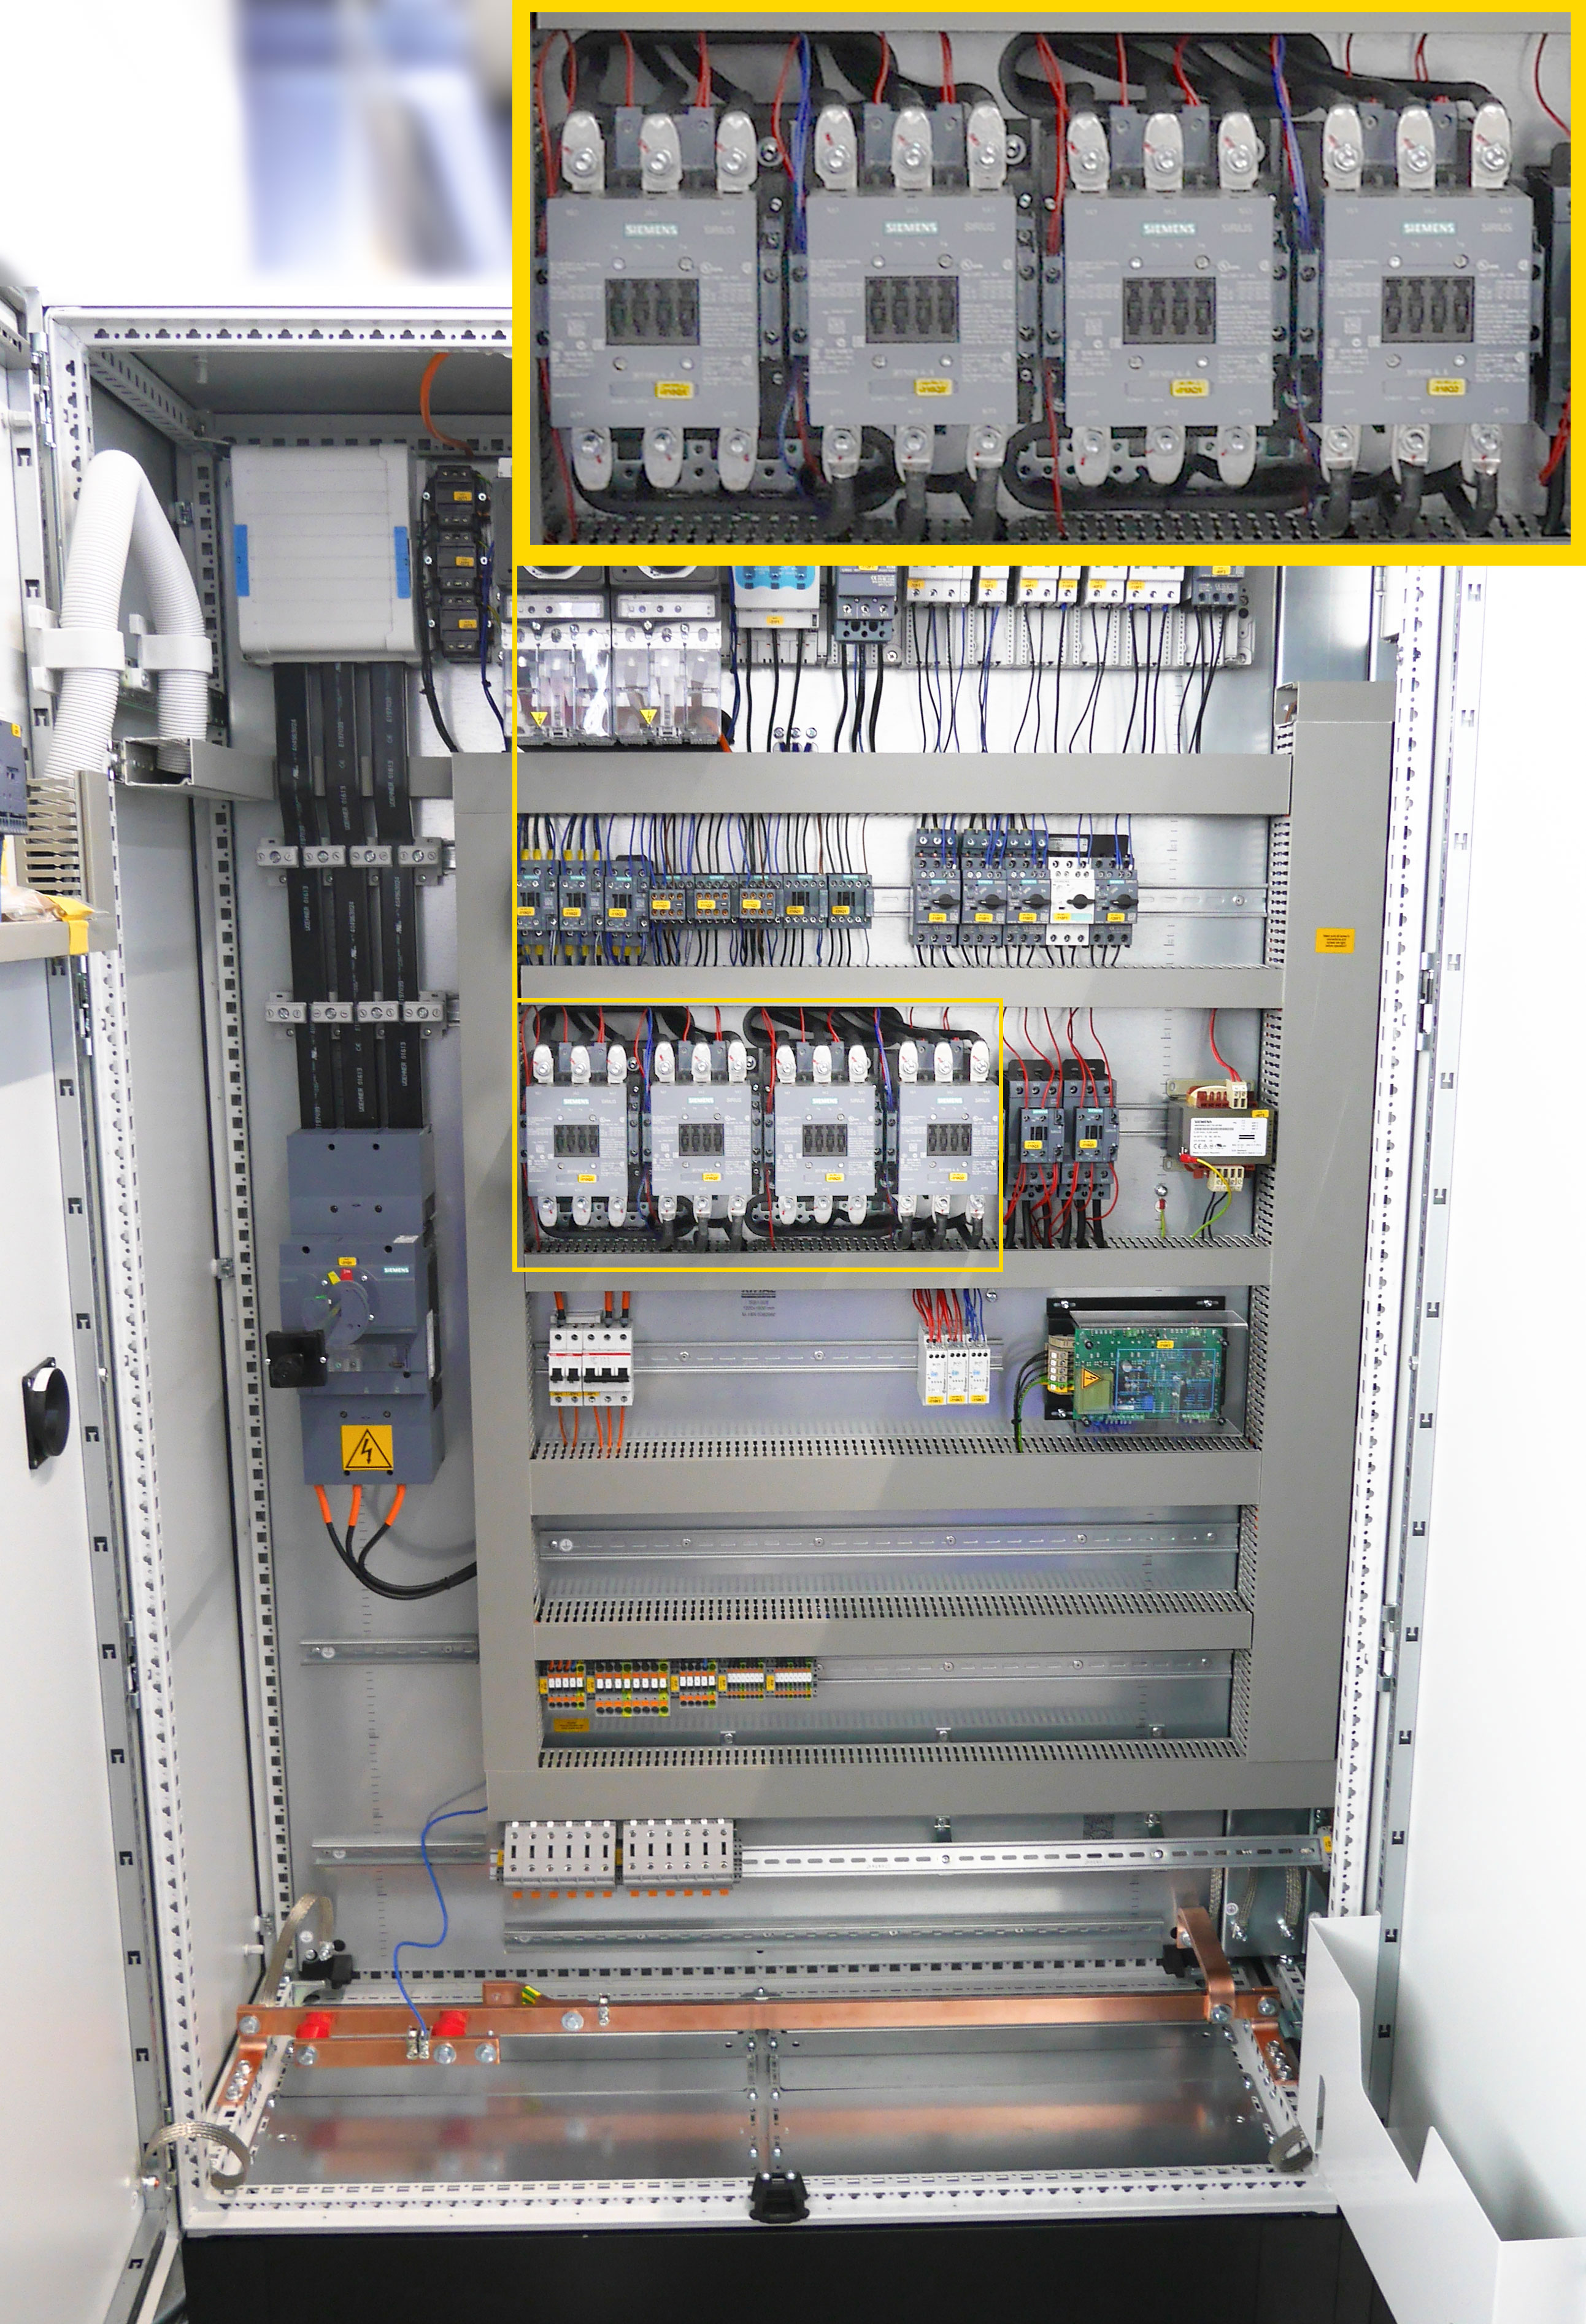 Load contactor for large electrical power